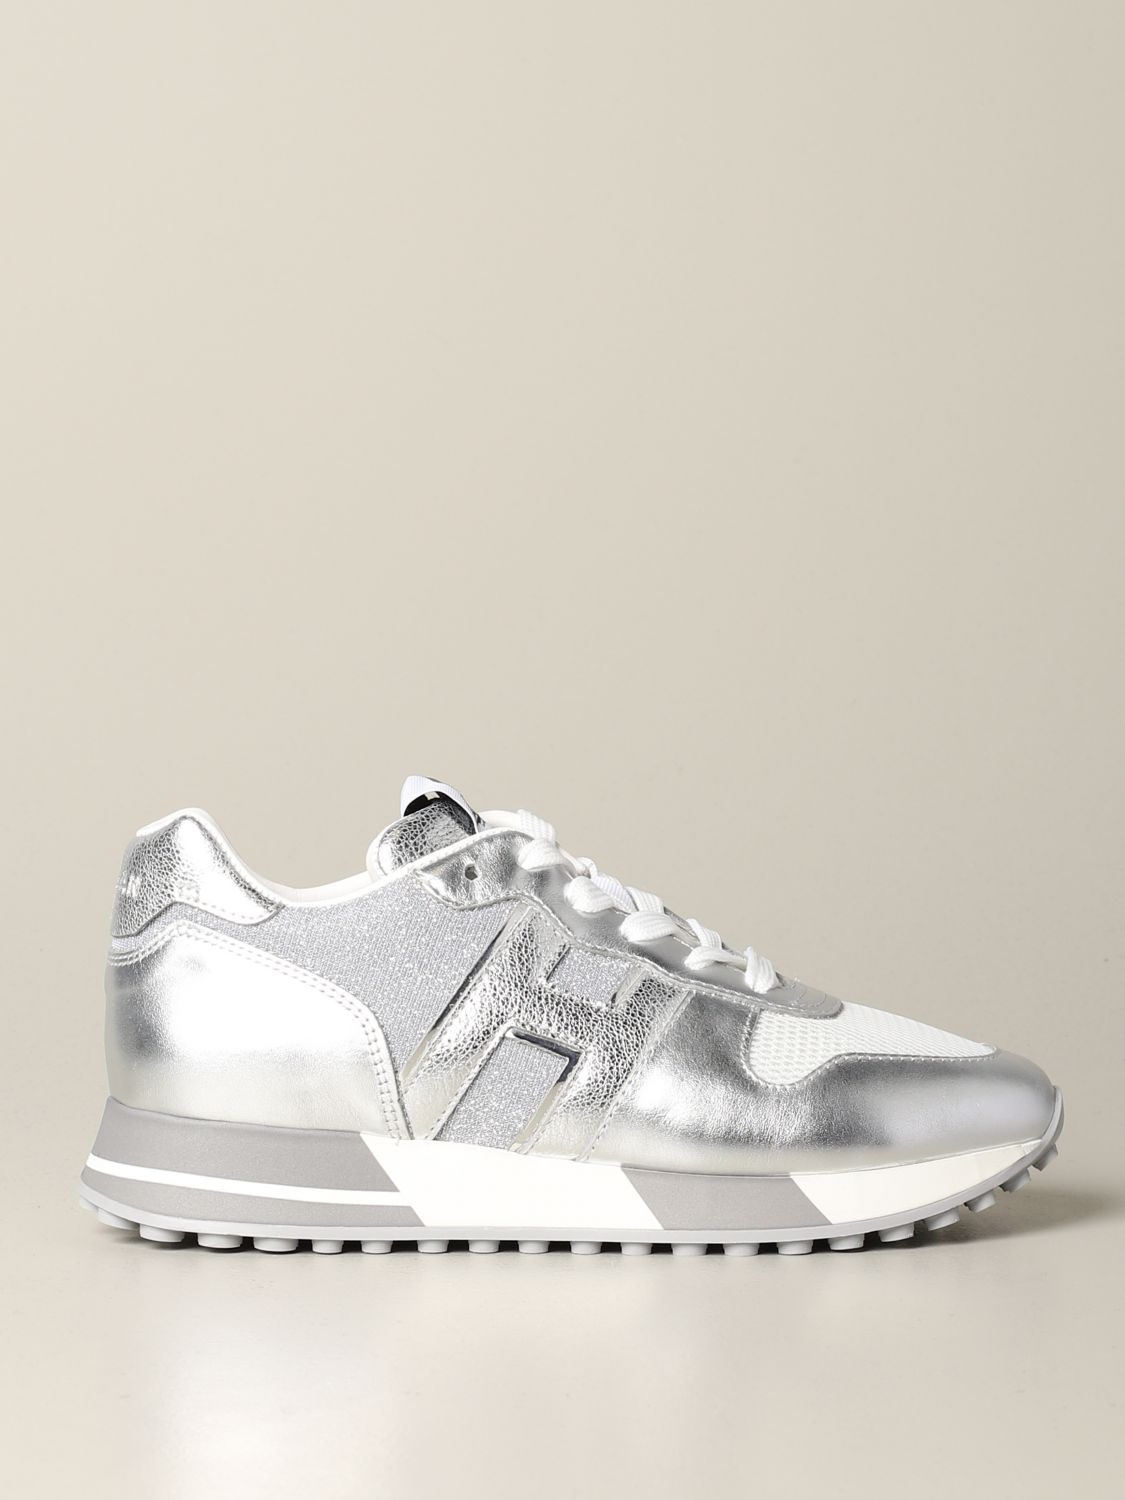 Hogan running sneakers in laminated leather and mesh | Sneakers Hogan Women  Silver | Sneakers Hogan HXW3830CR00 NCH Giglio EN